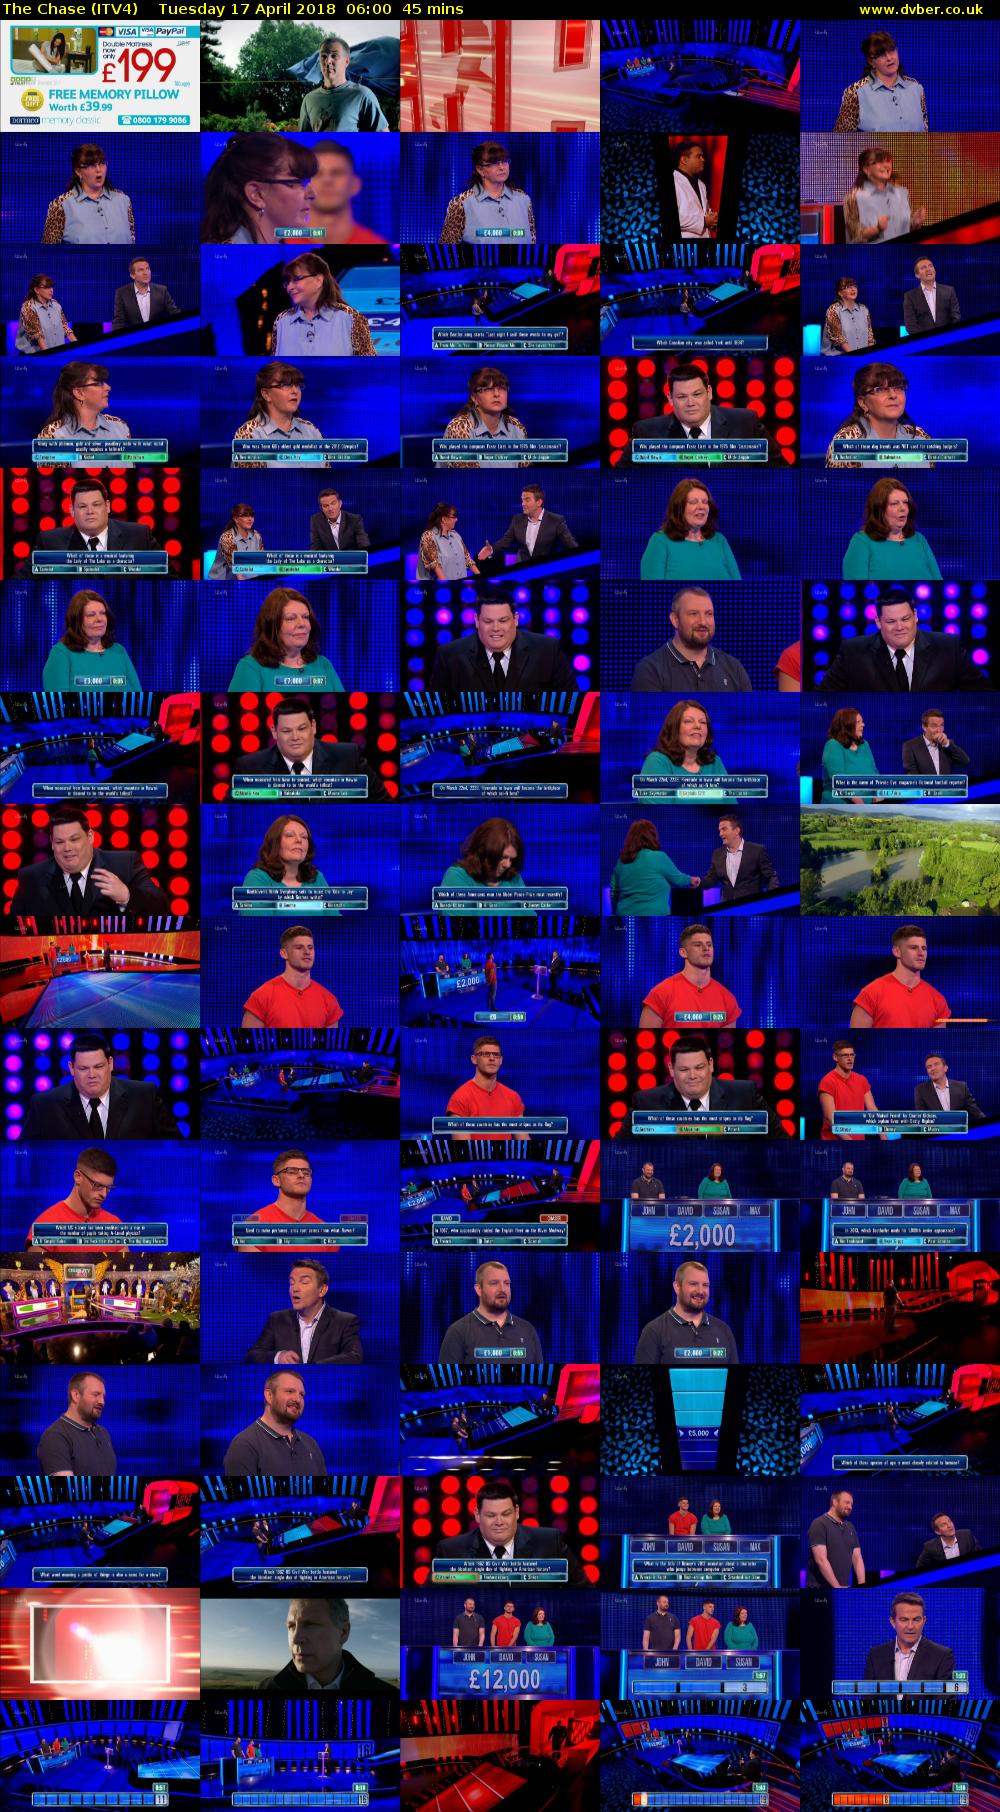 The Chase (ITV4) Tuesday 17 April 2018 06:00 - 06:45